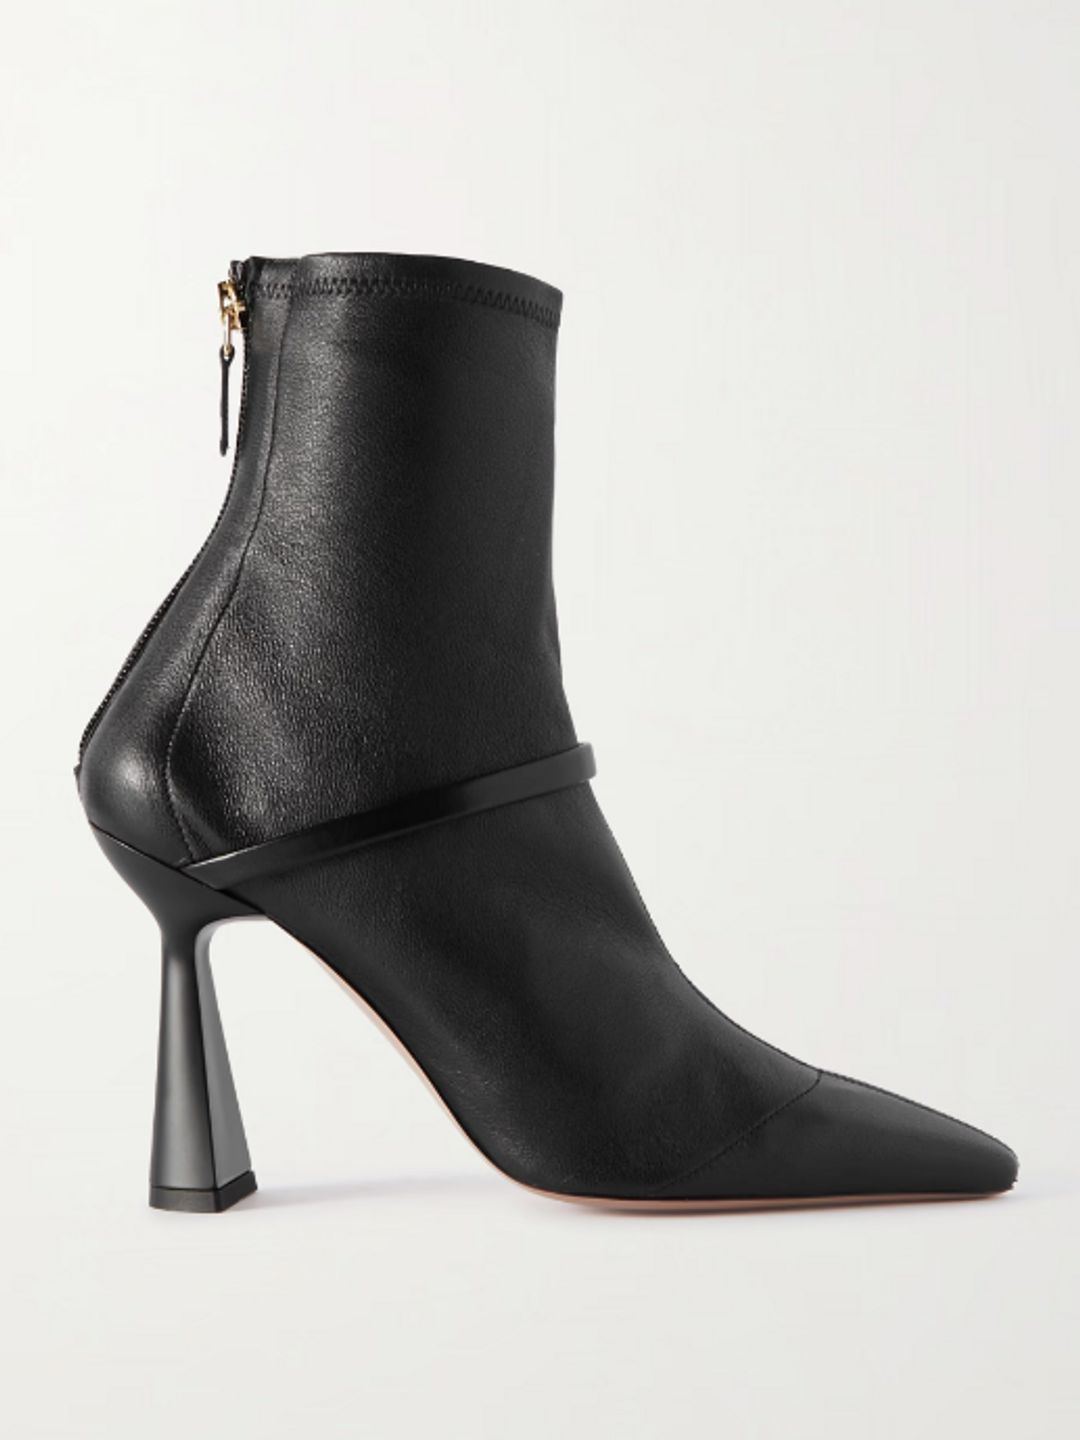 Oliana 95 Leather Ankle Boots